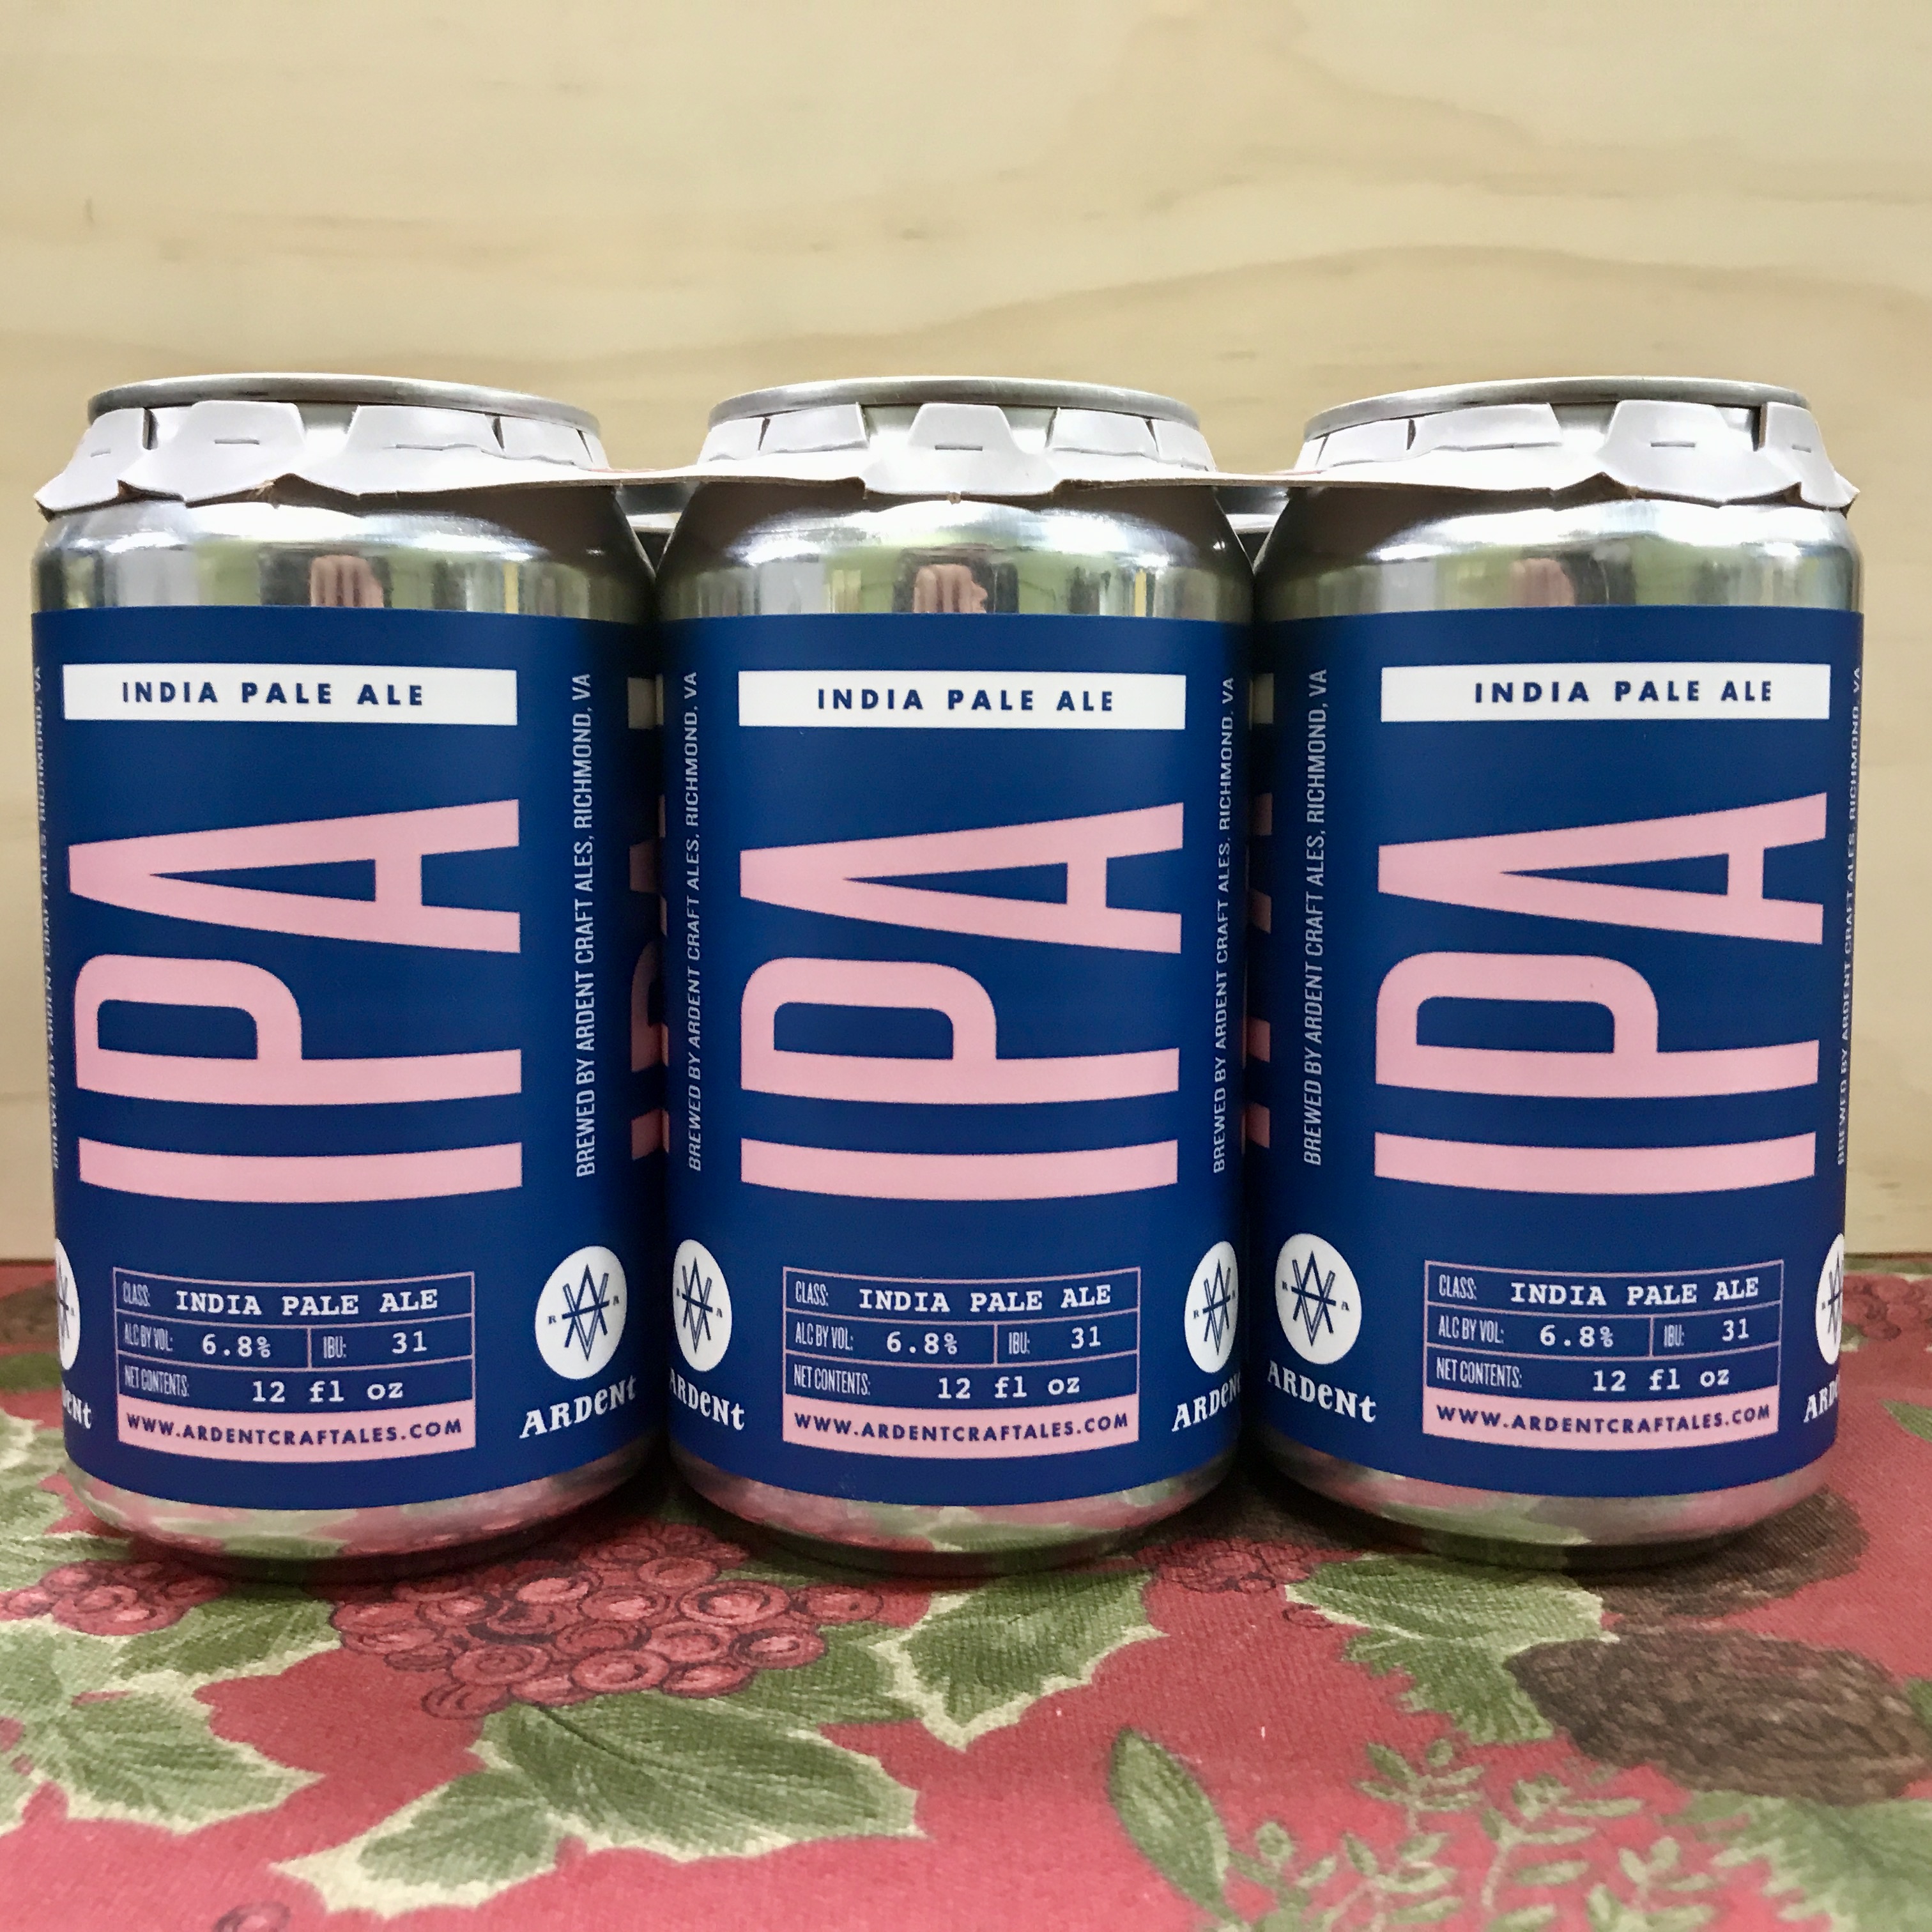 Ardent Brewery India Pale Ale 6 x 12oz cans